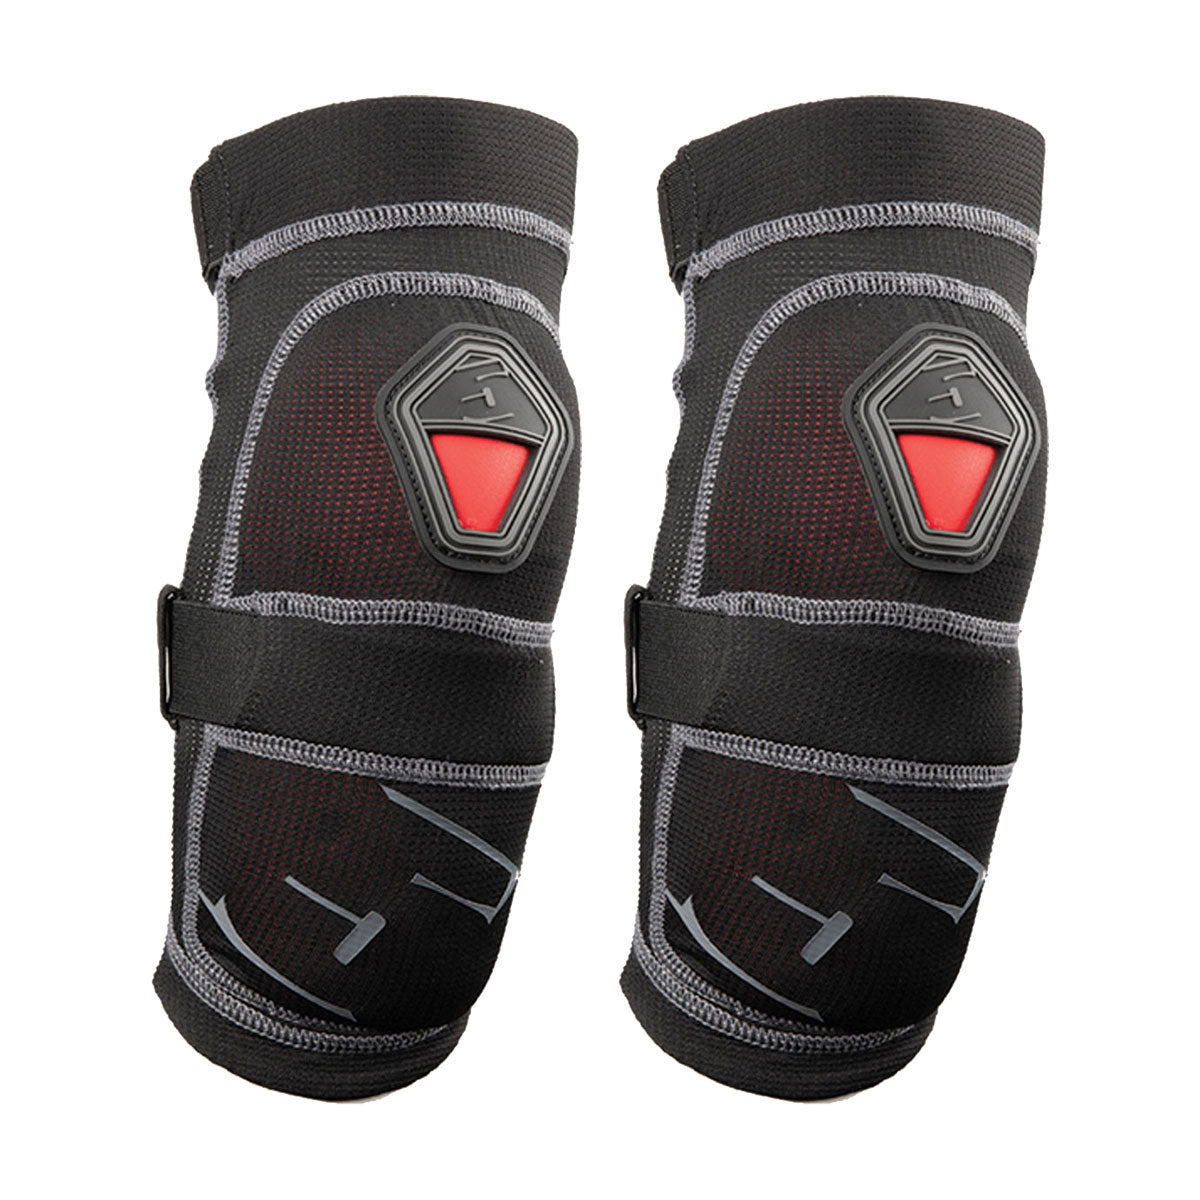 R-Mor Protective Elbow Pads